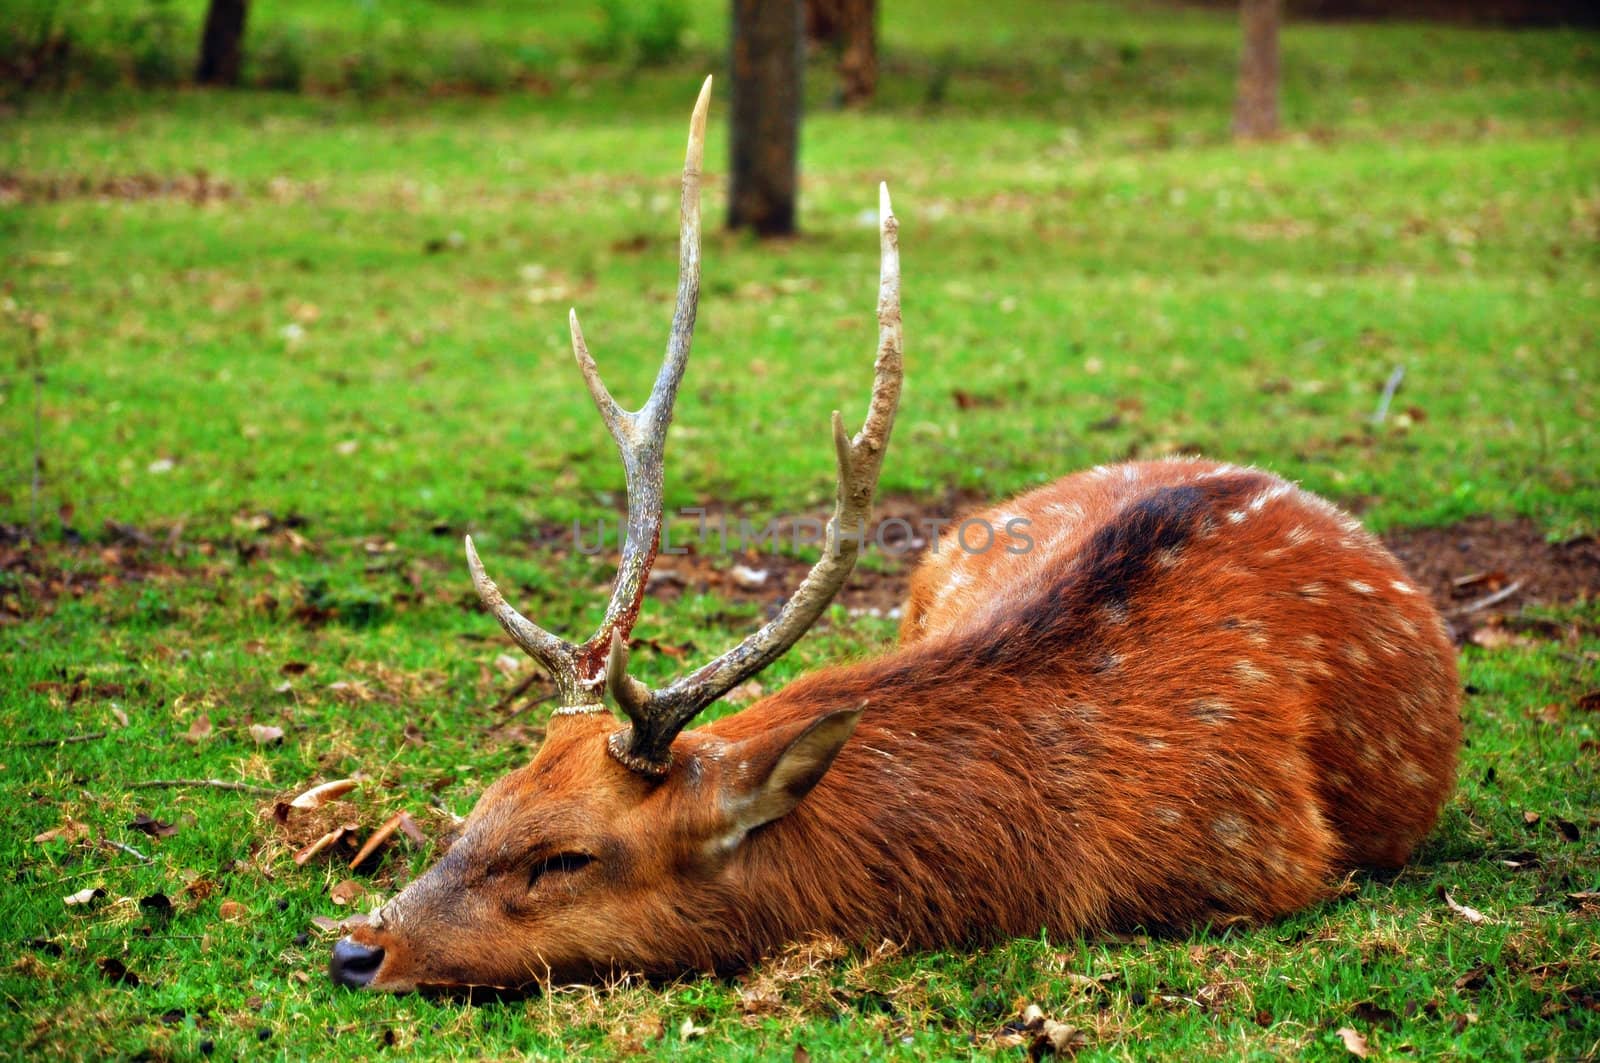 The sika deer inhabits temperate and subtropical woodlands, which often occupy areas suitable for farming and other human exploitation.